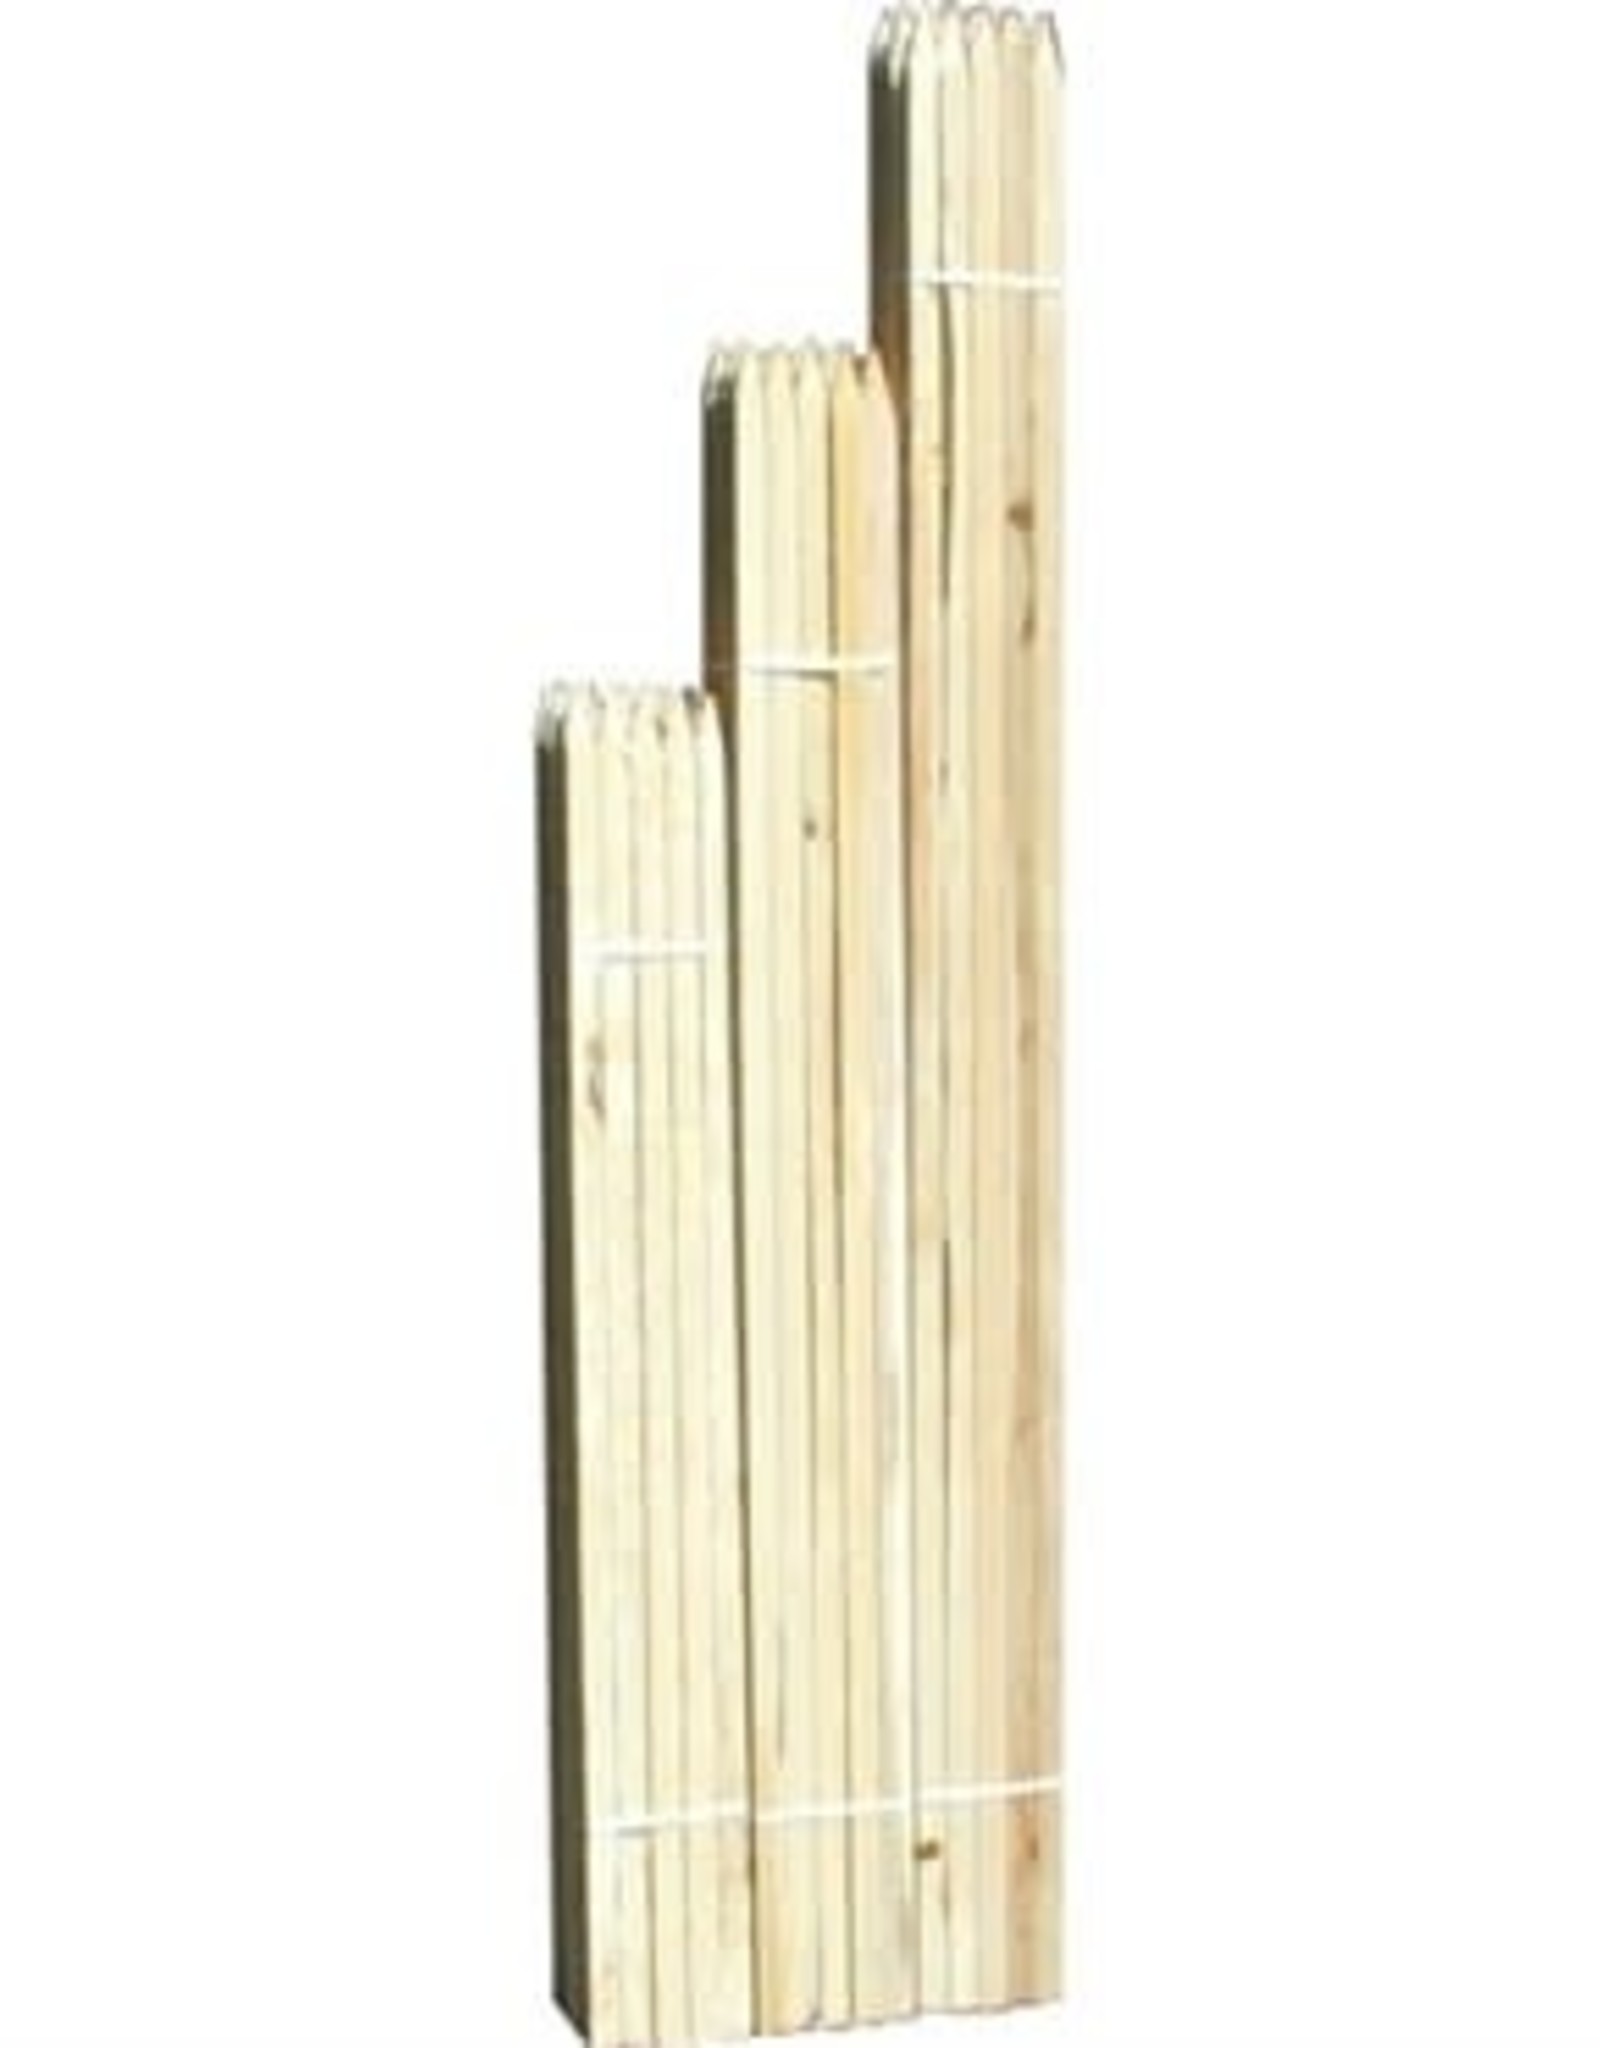 Eaton Brothers Tree Stakes 2x2x6'